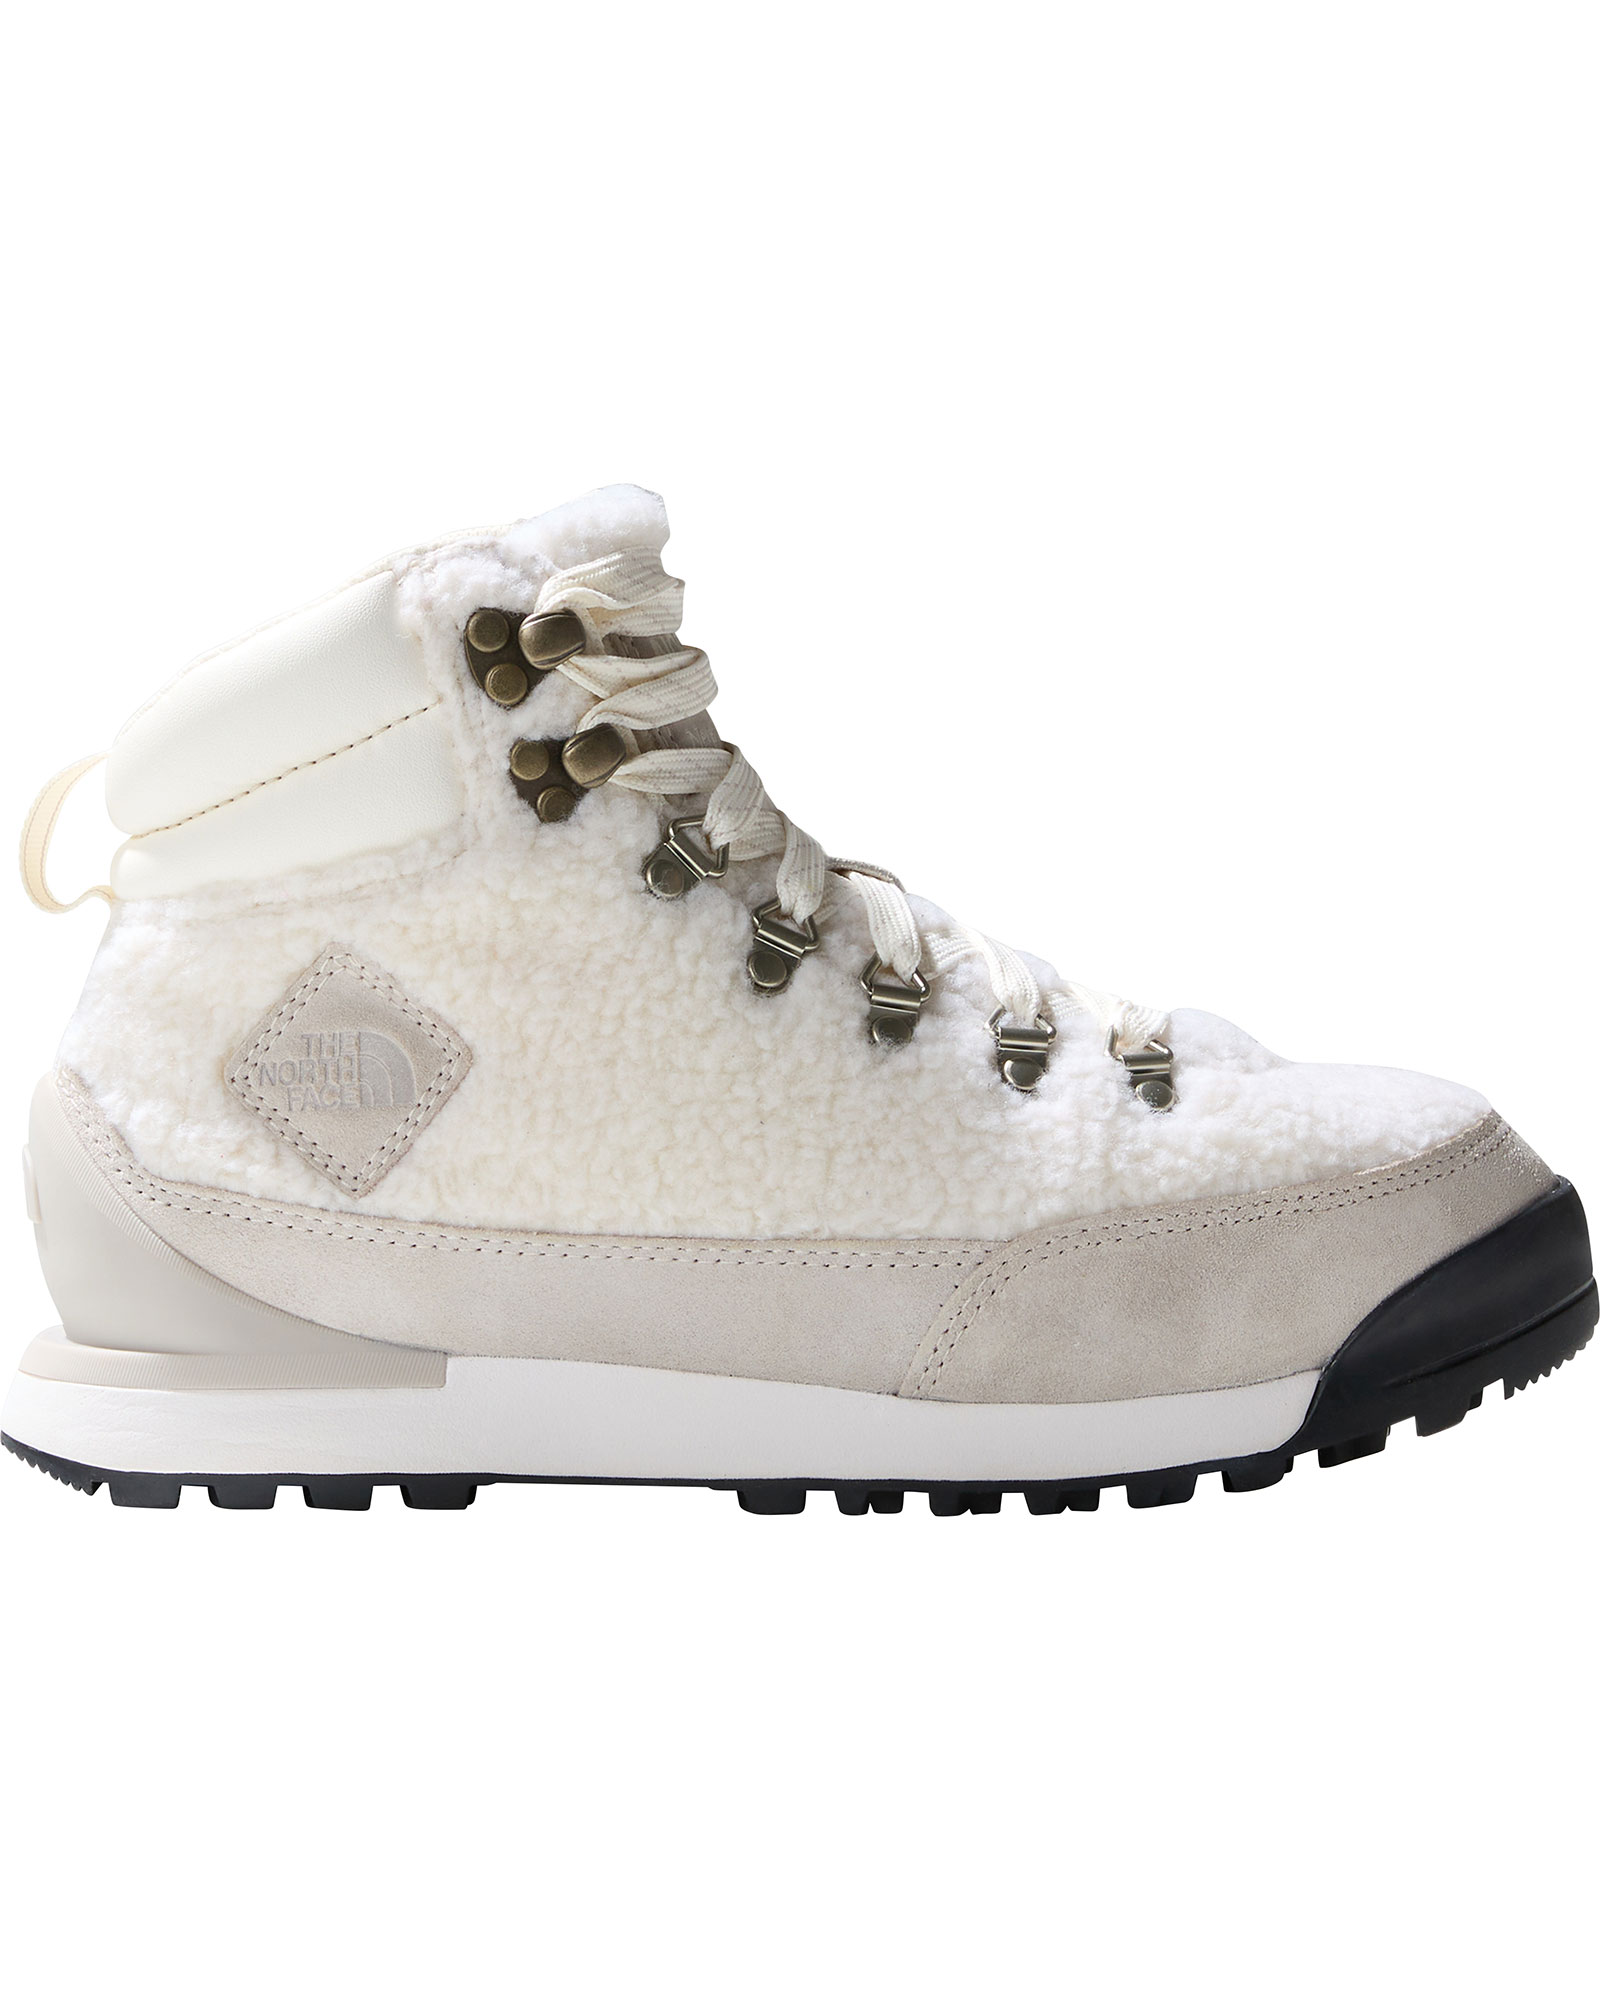 The North Face Back to Berkeley High Pile Women’s Boots - Gardenia White/Silver Grey UK 4